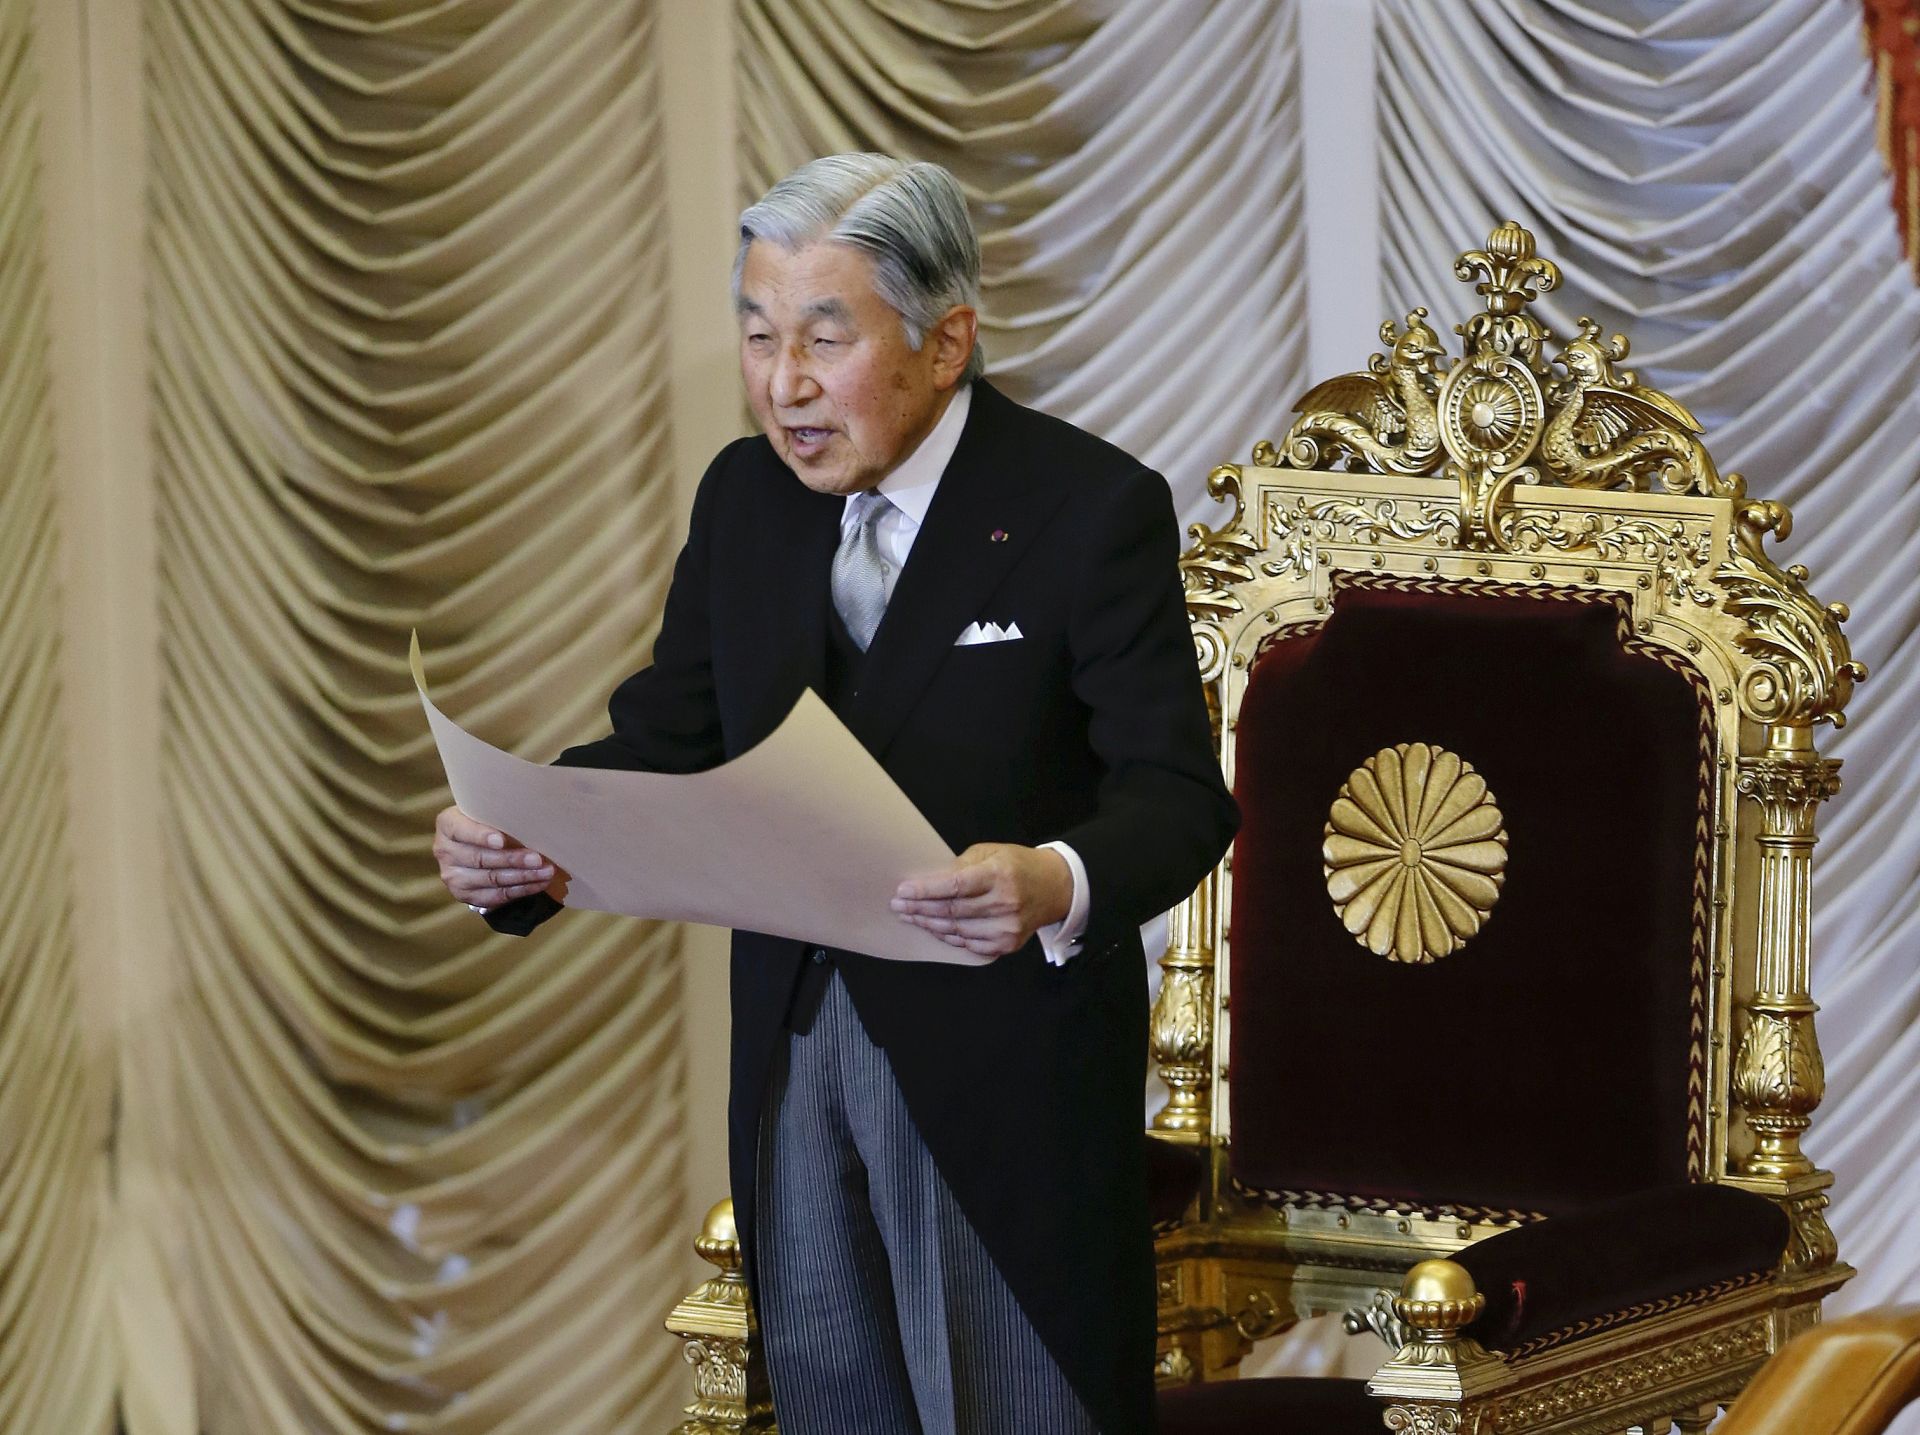 epa05461232 (FILE) A file photo of Japan's Emperor Akihito as he delivers a speech during the opening ceremony of a Diet session in Tokyo, Japan, 01 August 2016. The 82-year-old monarch will address the nation per video message on 08 August 2016. He is expected to pronounce his own intentions following public speculations about the emperor's wish to abdicate in the near future. Emperor Akihito has been on the Japanese throne for 27 years by now.  EPA/KIMIMASA MAYAMA